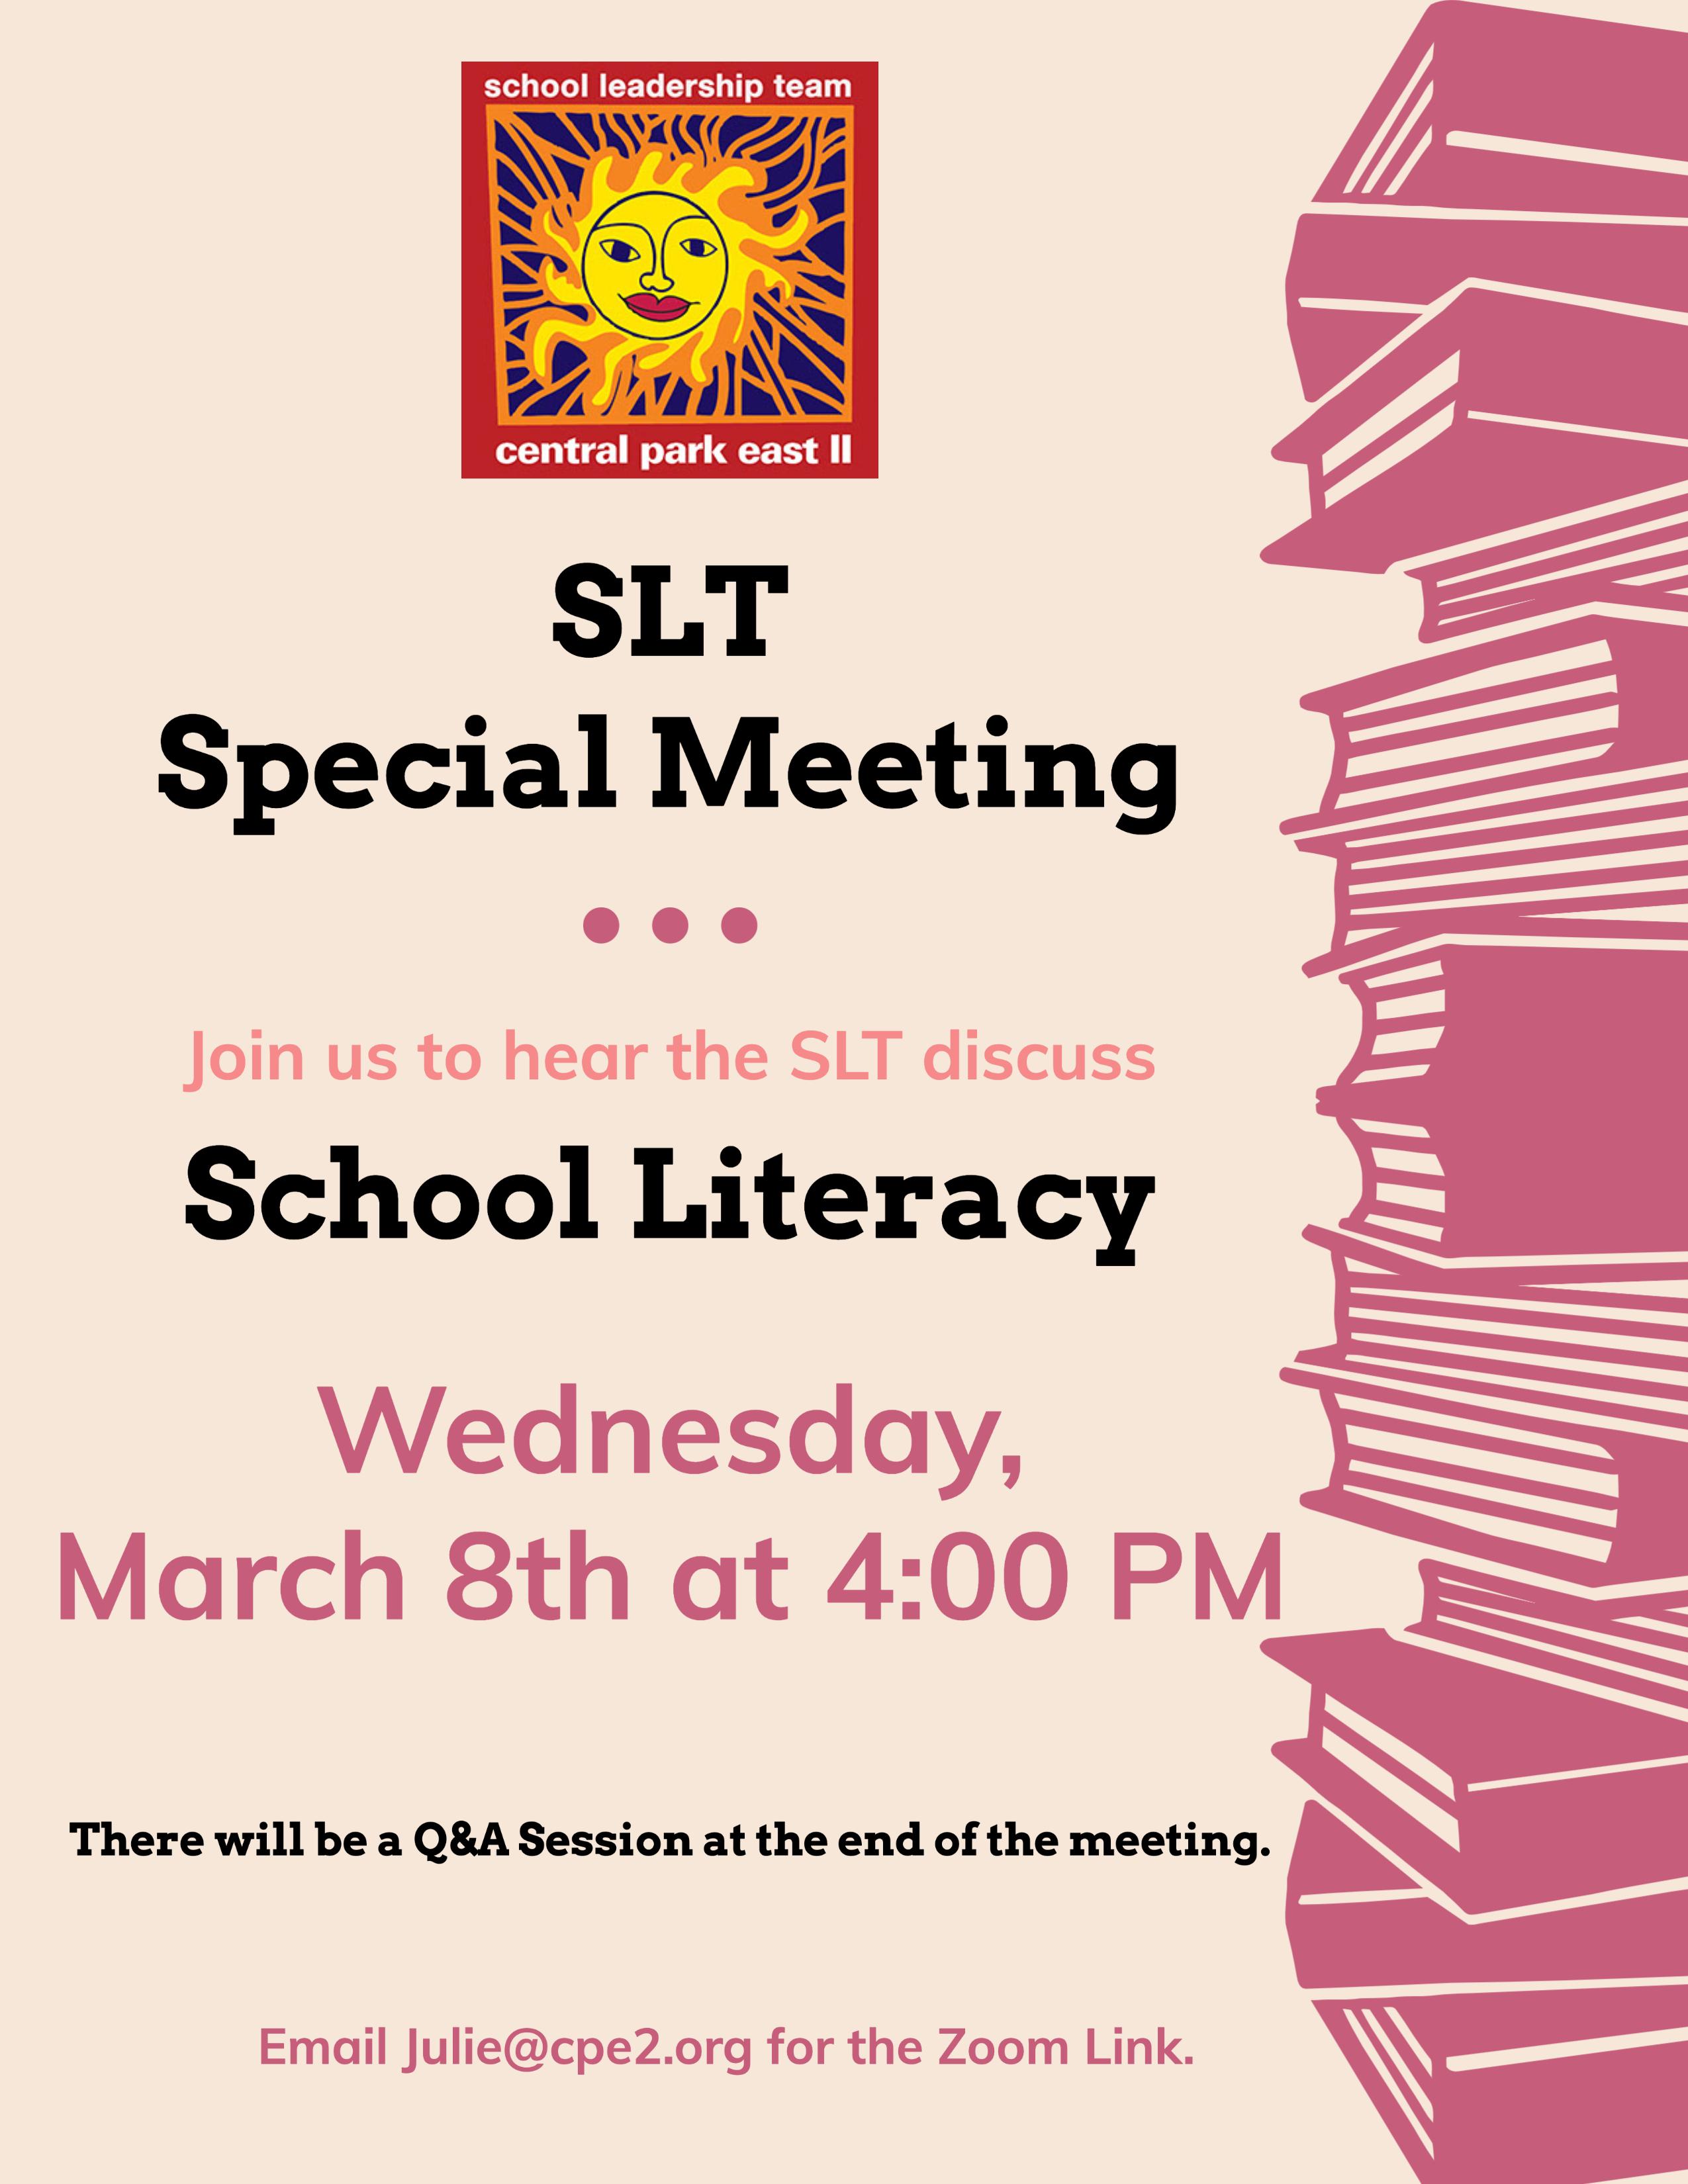 Central Park East II School Leadership Team Special meeting.  Join us to hear the SLT discuss School Literacy. Wednesday, March 8th at 4pm. Email Julie@cpe2.org for the zoom link.  There will be a Q&A Session at the end of the meeting.